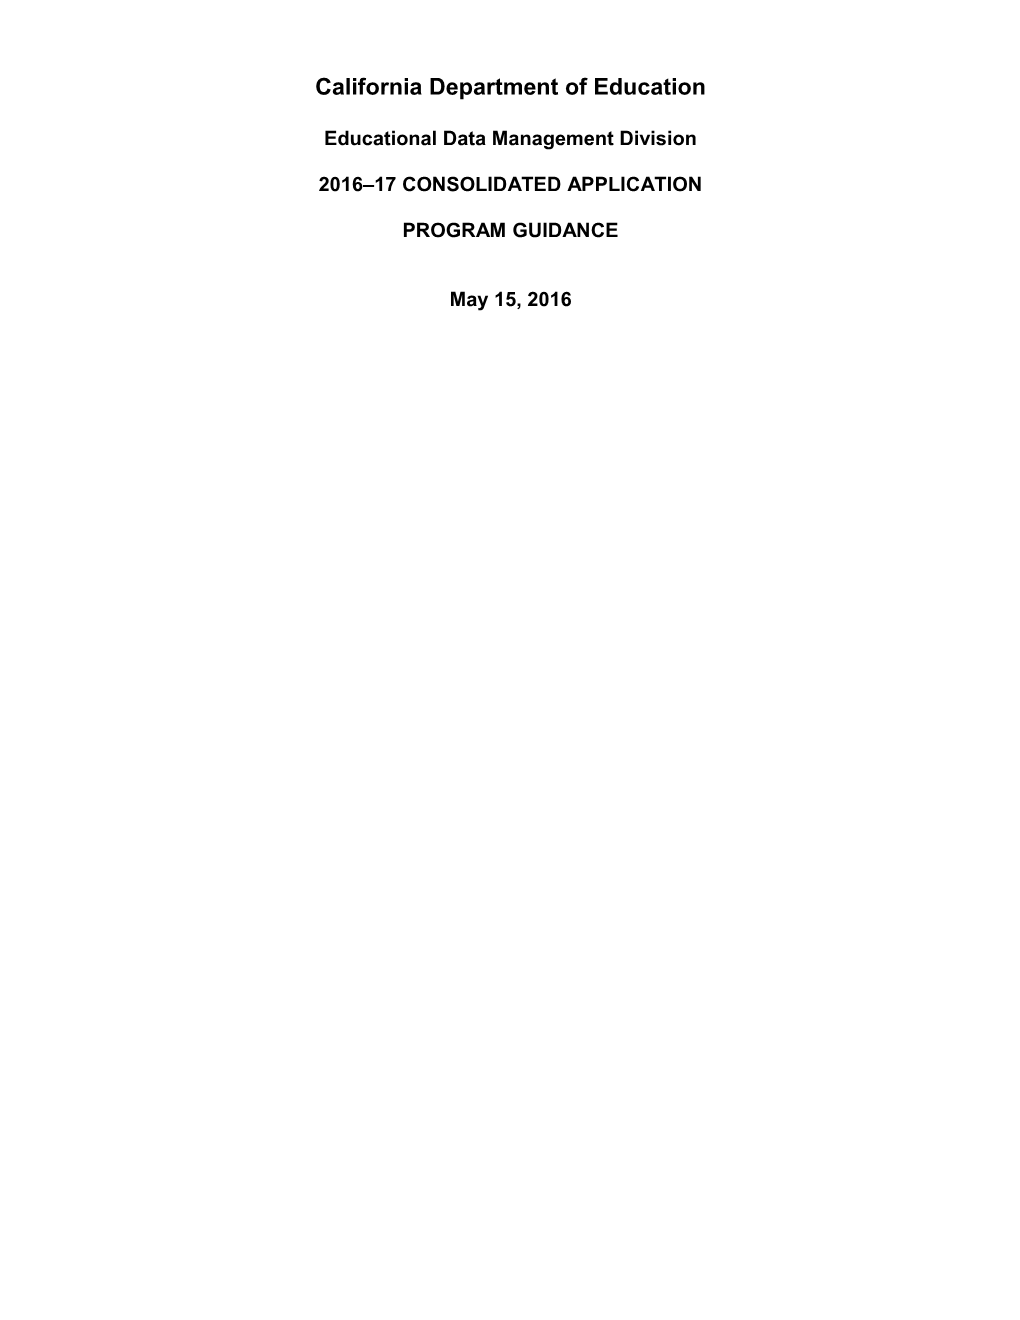 Guid-16: Conapp 2016-17 Spring Release (CA Dept of Education)